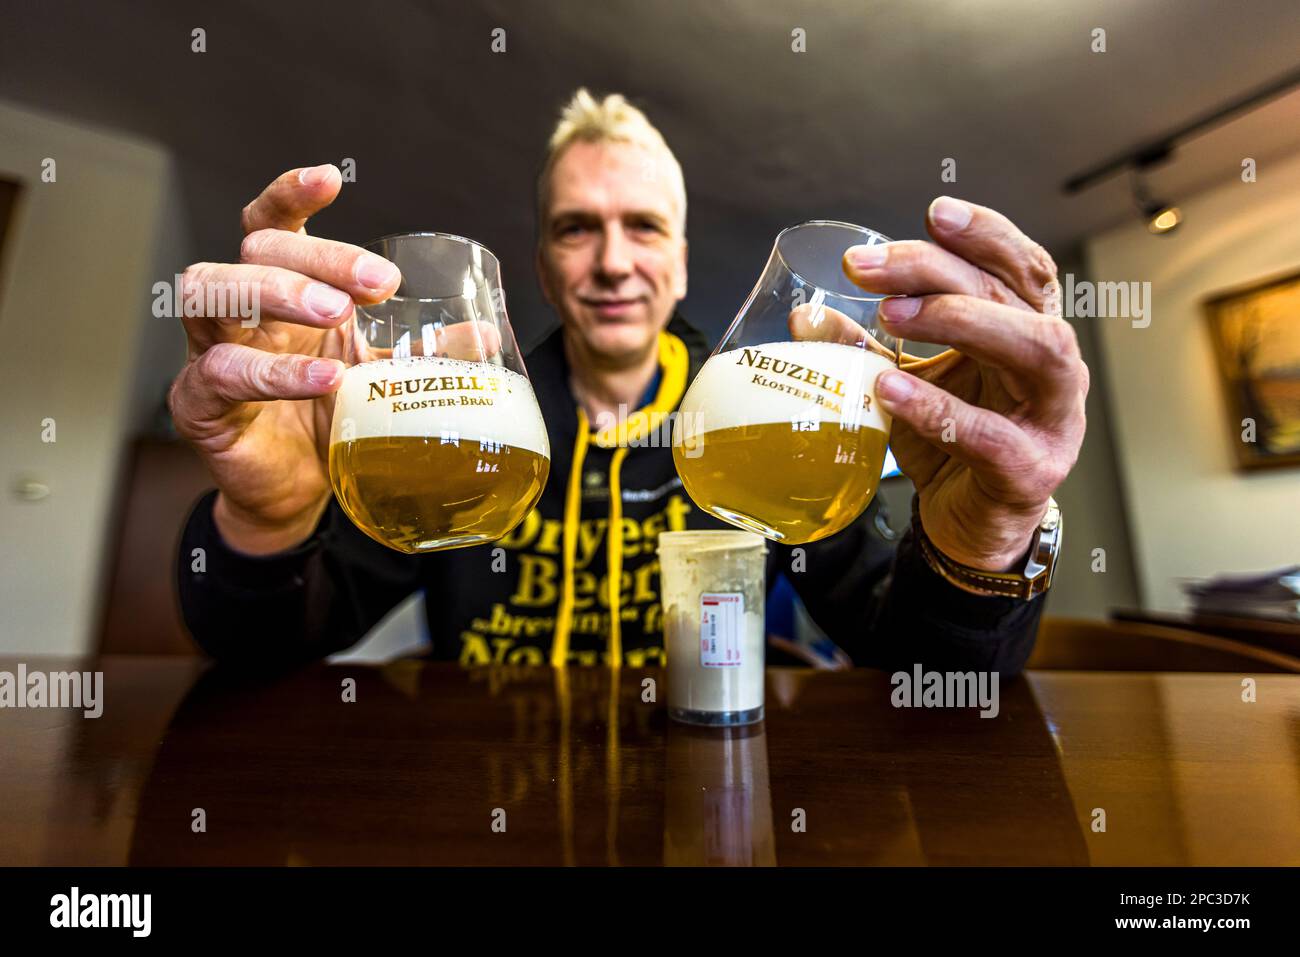 Stefan Fritsche with freshly stirred beer powder. The product innovation from the Neuzelle monastery brewery rethinks the beer process and impresses with climate-friendly arguments during transport. Stephan Fritsche, managing director of the German Klosterbrauerei Neuzelle (monastery brewery) demonstrates the novel beer powder under development Stock Photo